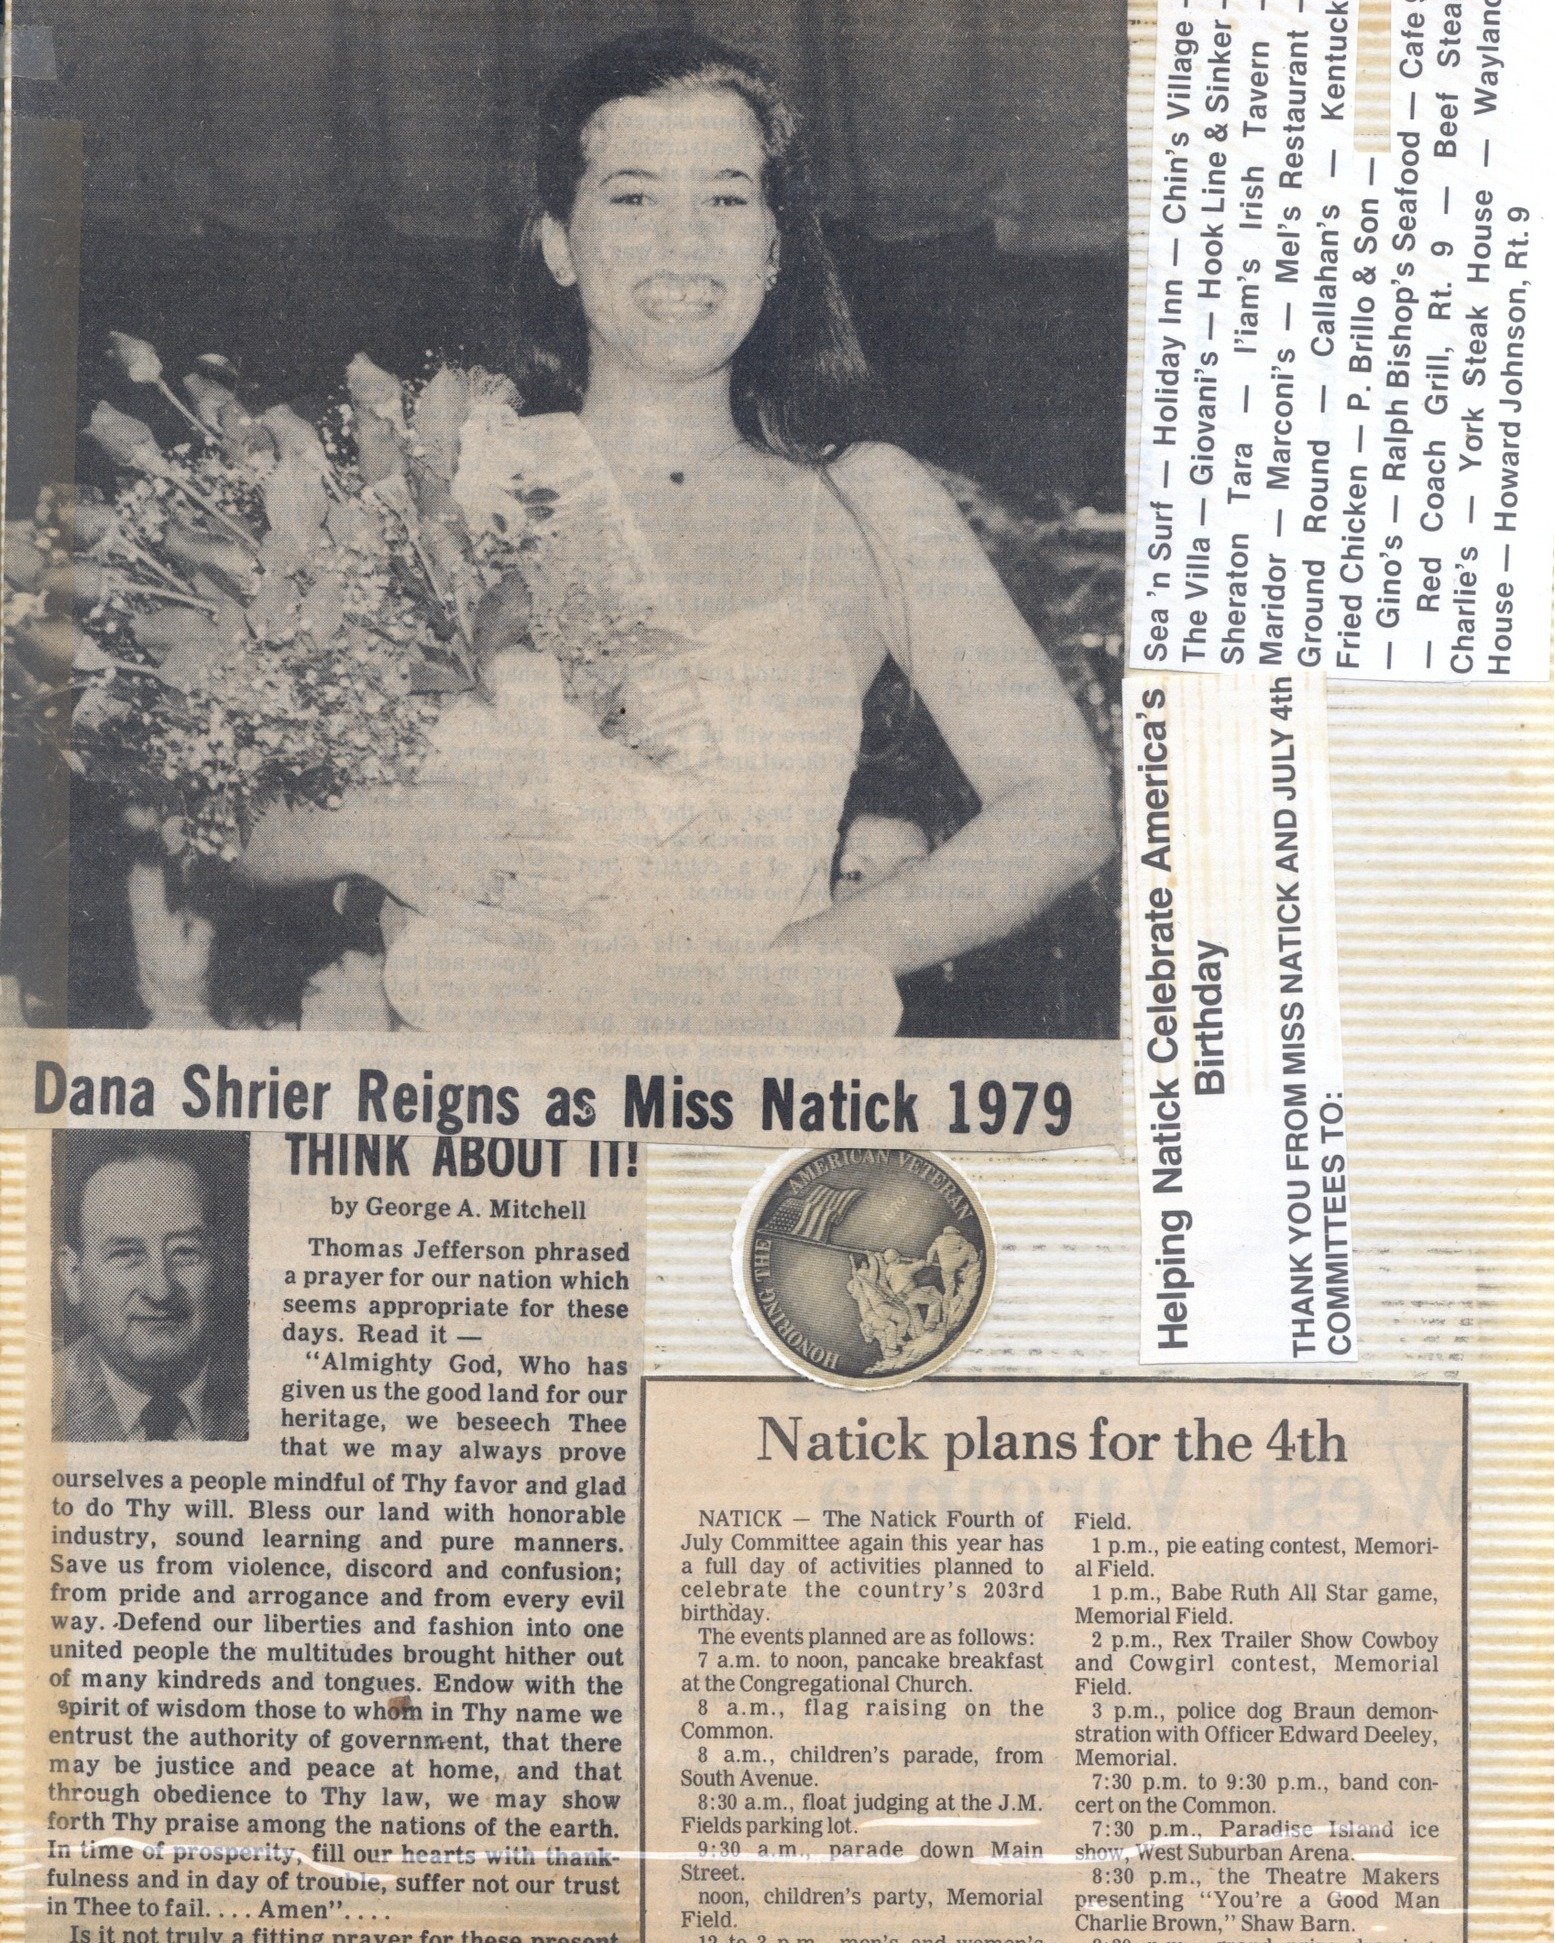 4th of July, 1979!! Miss Natick was the beautiful Dana Shrier, hope you enjoy these photos and scrapbook pages. 
Kathleen Peterson O'Brien Lauren Wiles Pelser #natickma #metrowest #july4th #hometown #patriotic #pageant